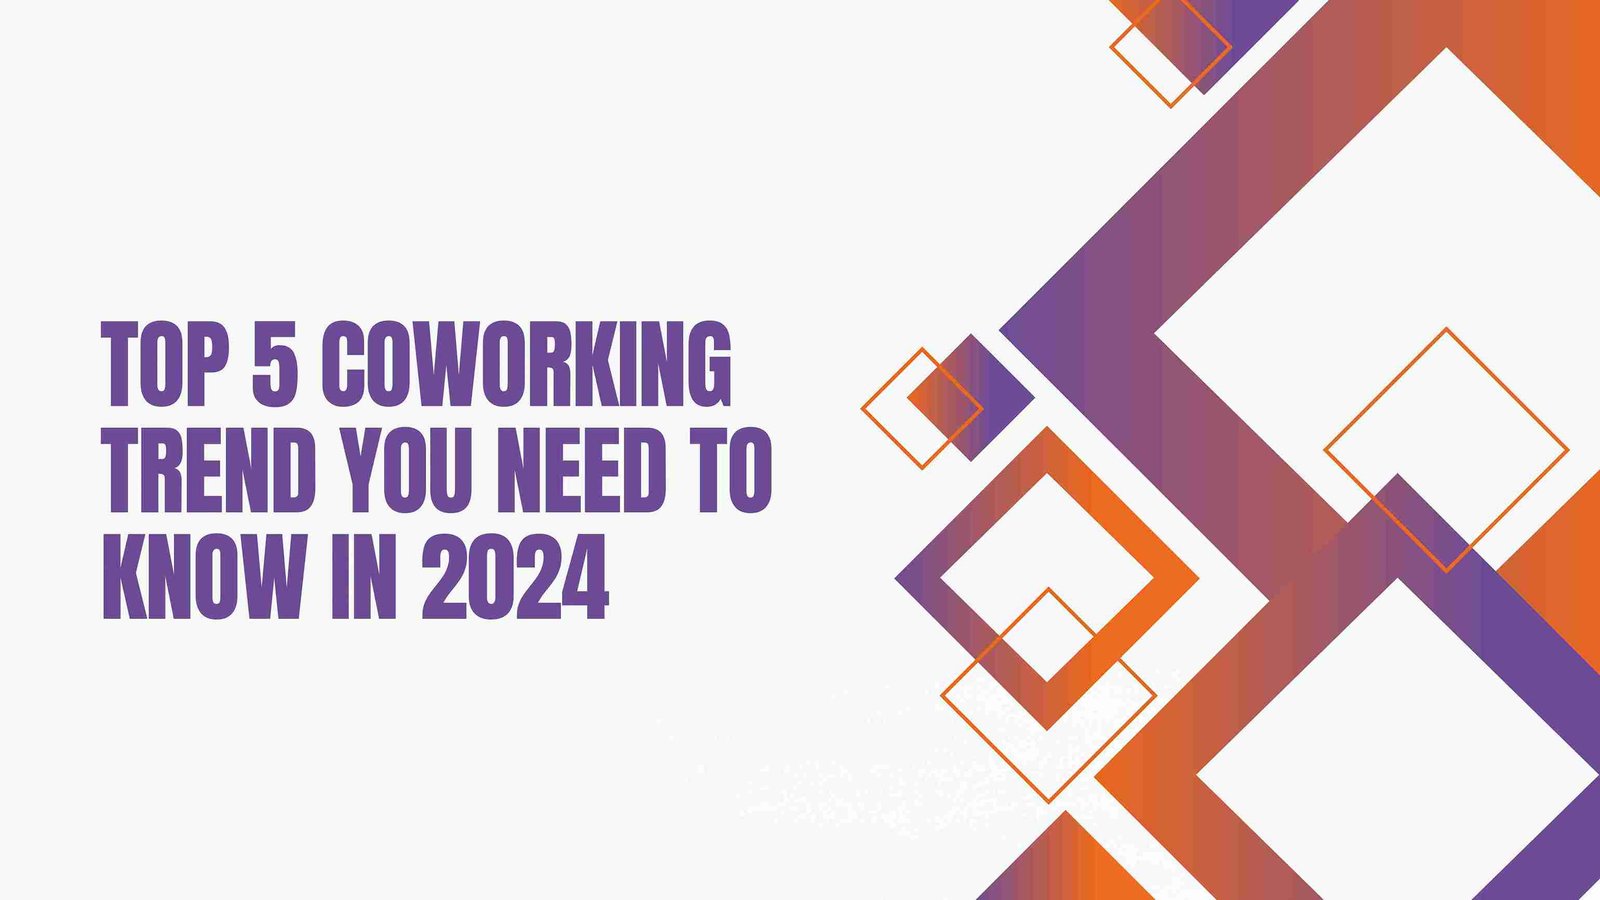 Top 5 Coworking Trends you need to know in 2024